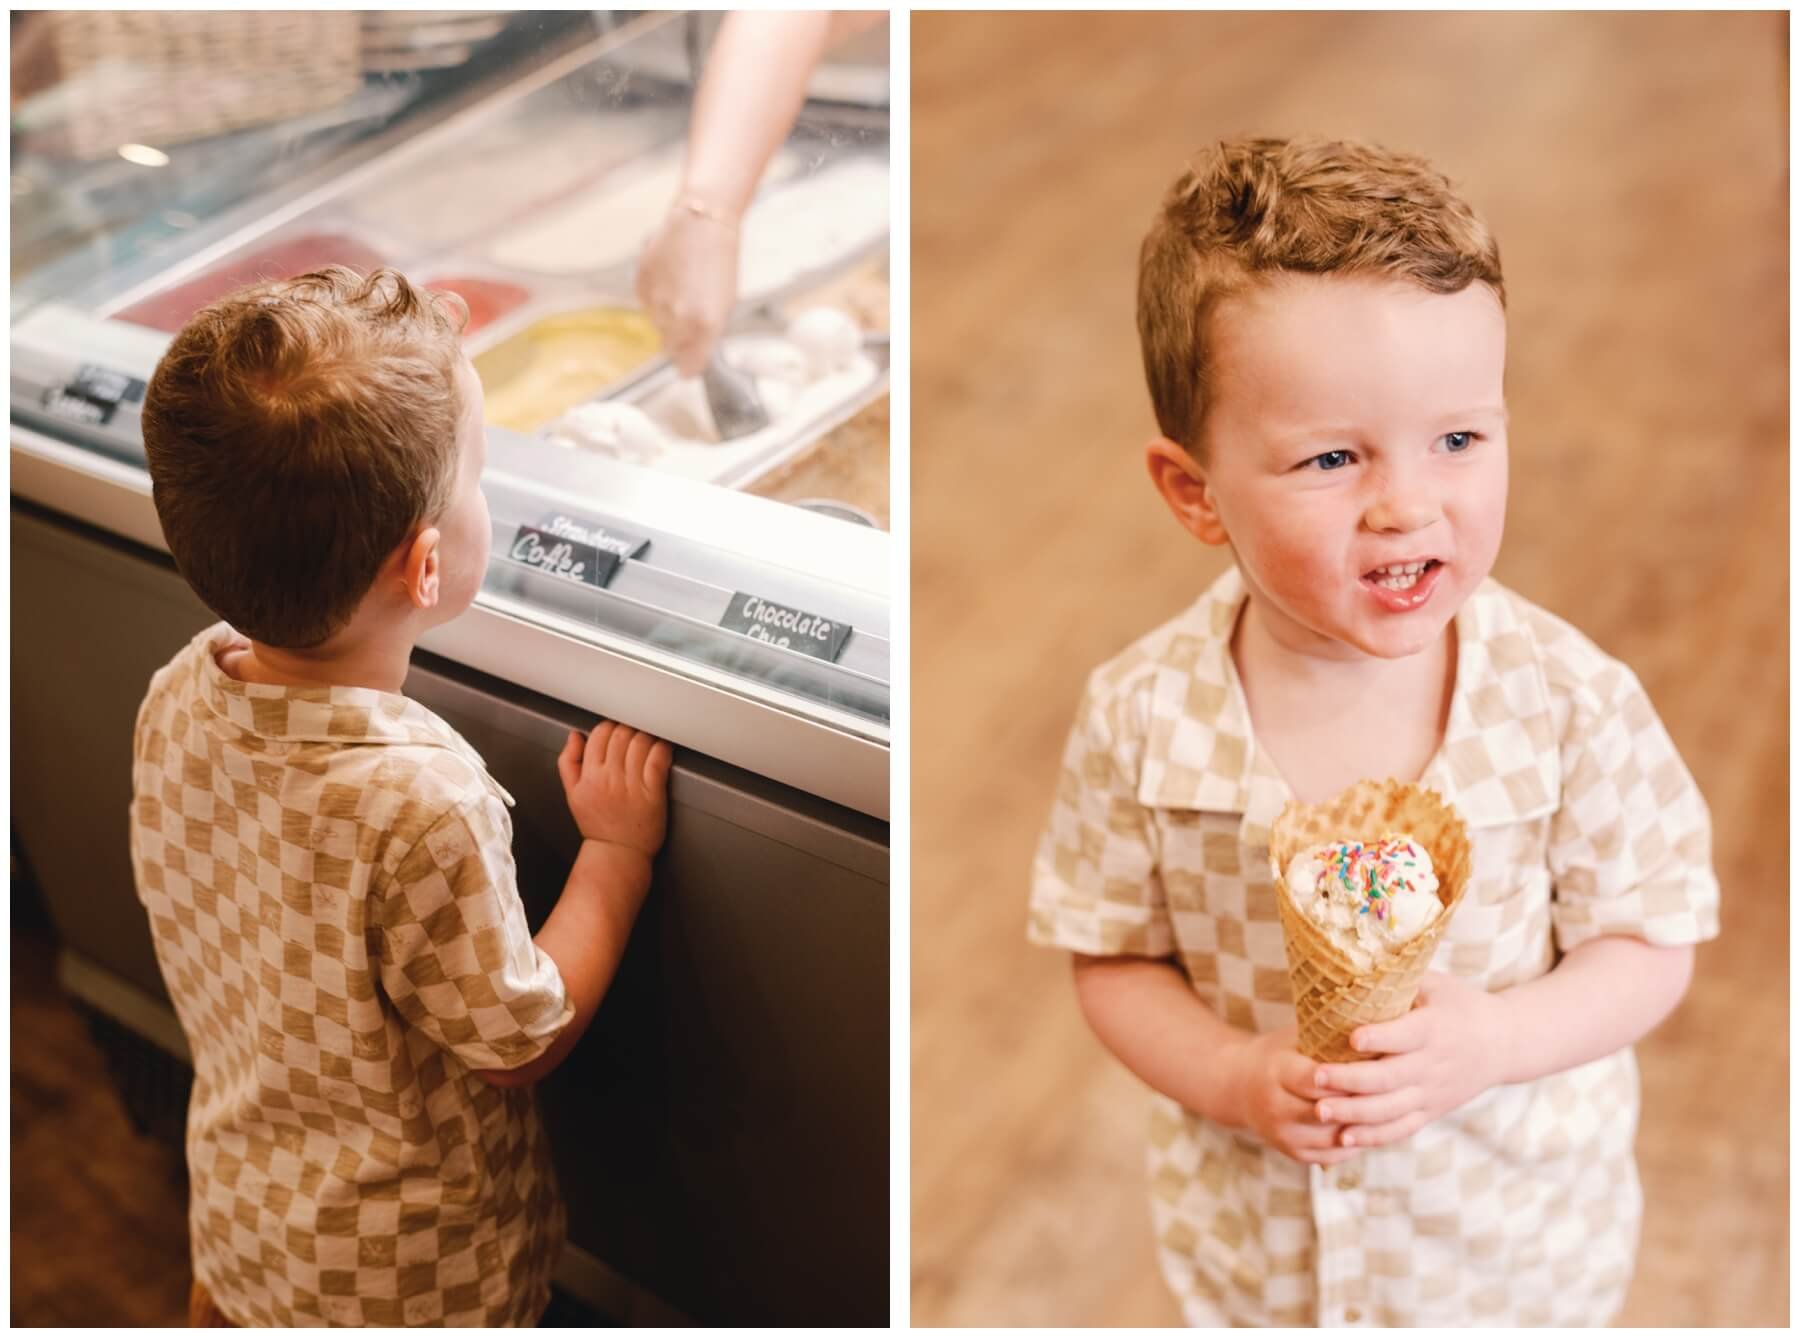 Boy looking at ice cream choices and holding ice cream cone